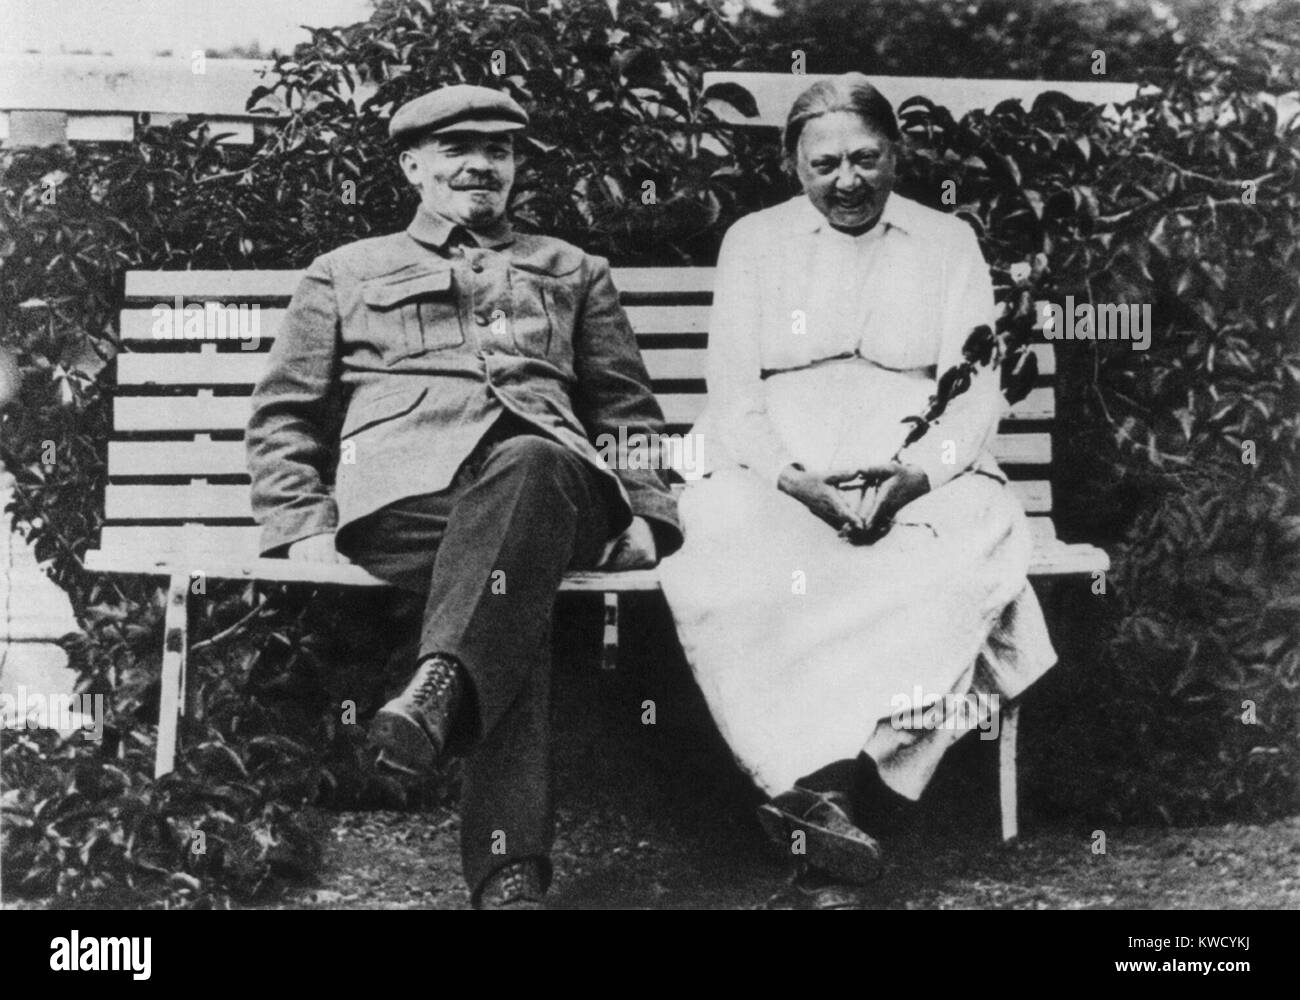 Lenin and his wife Krupskaya sit together in their dacha garden at Gorki, August 1922. Lenin was convalescing from a May 1922 stroke and returned to work in Moscow in October. He had a second stroke in Dec. 1922, followed by a third in March 1923, which left him an invalid until his death in March 1924 (BSLOC 2017 2 21) Stock Photo